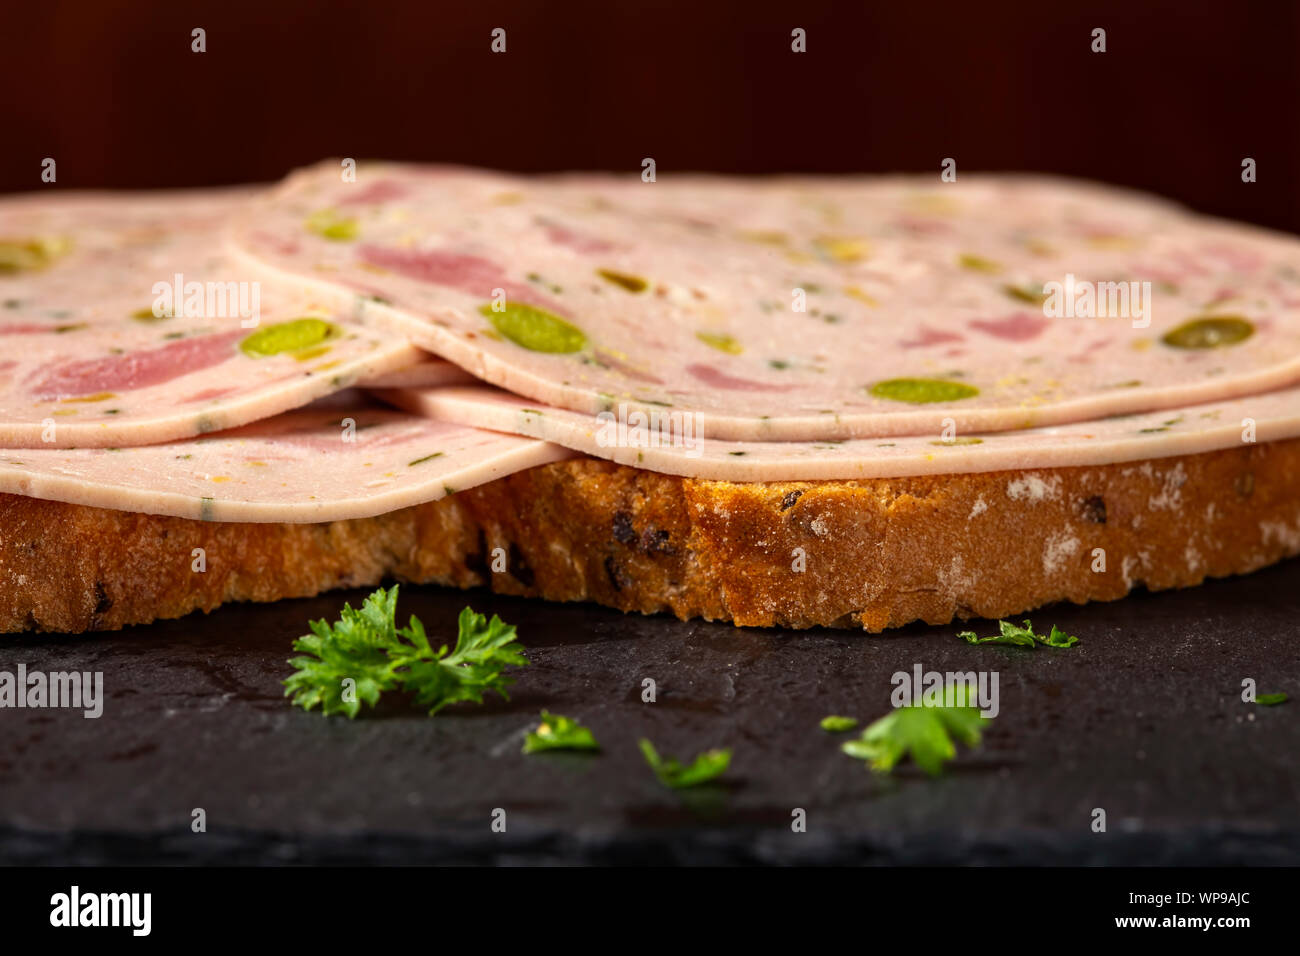 Open sandwich with Salami made from green vegetables like olives and pepper - close up view Stock Photo